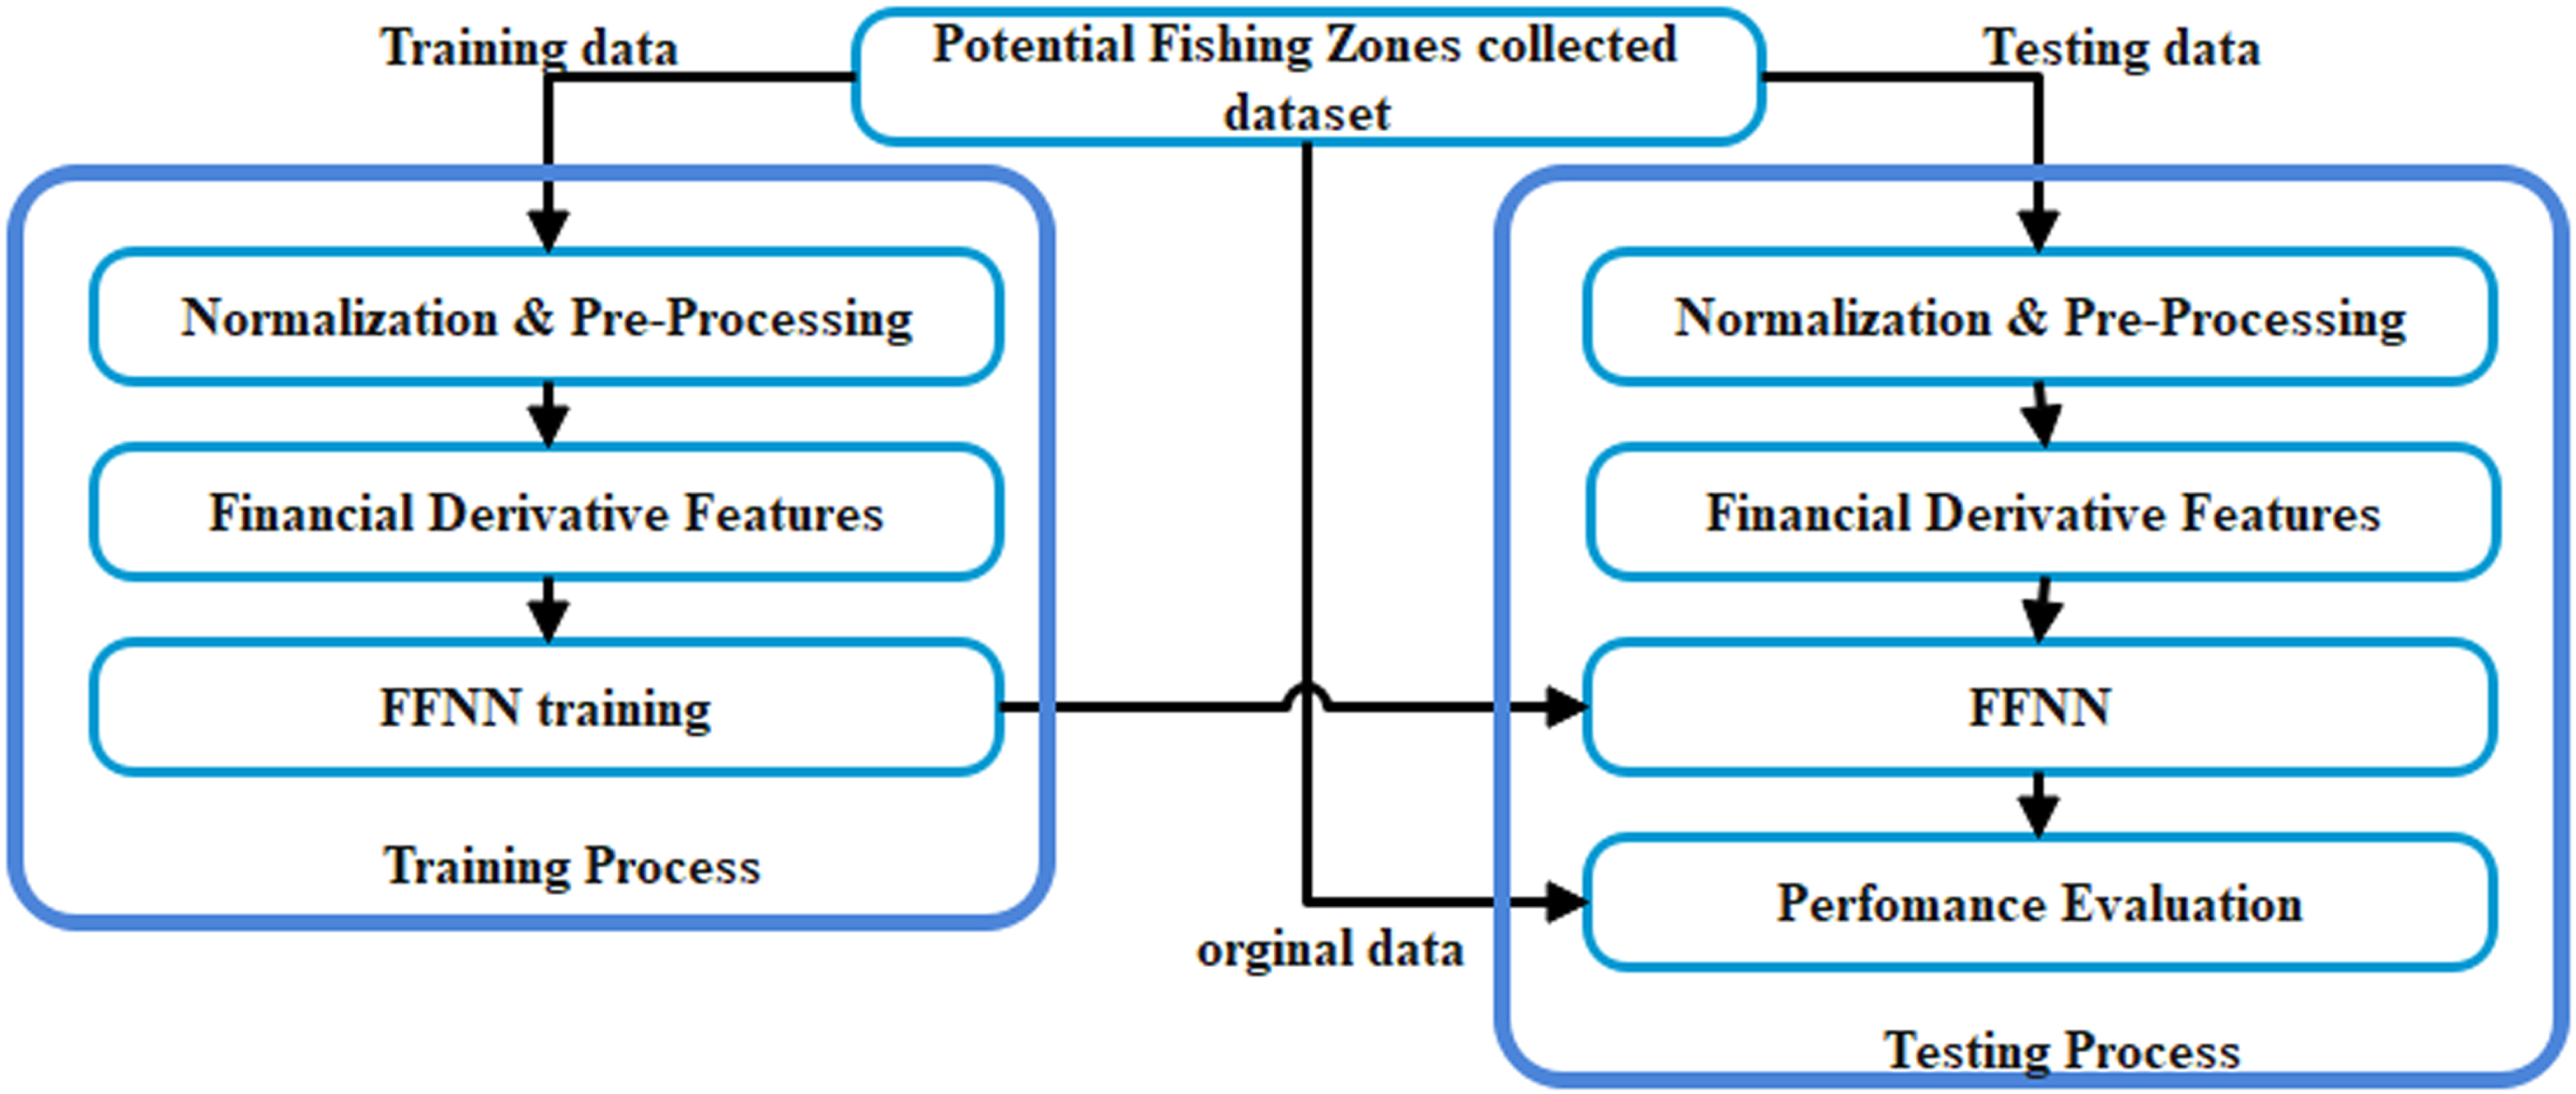 Proposed Financial Derivative Features based IPFZ Future Forecast Architecture.